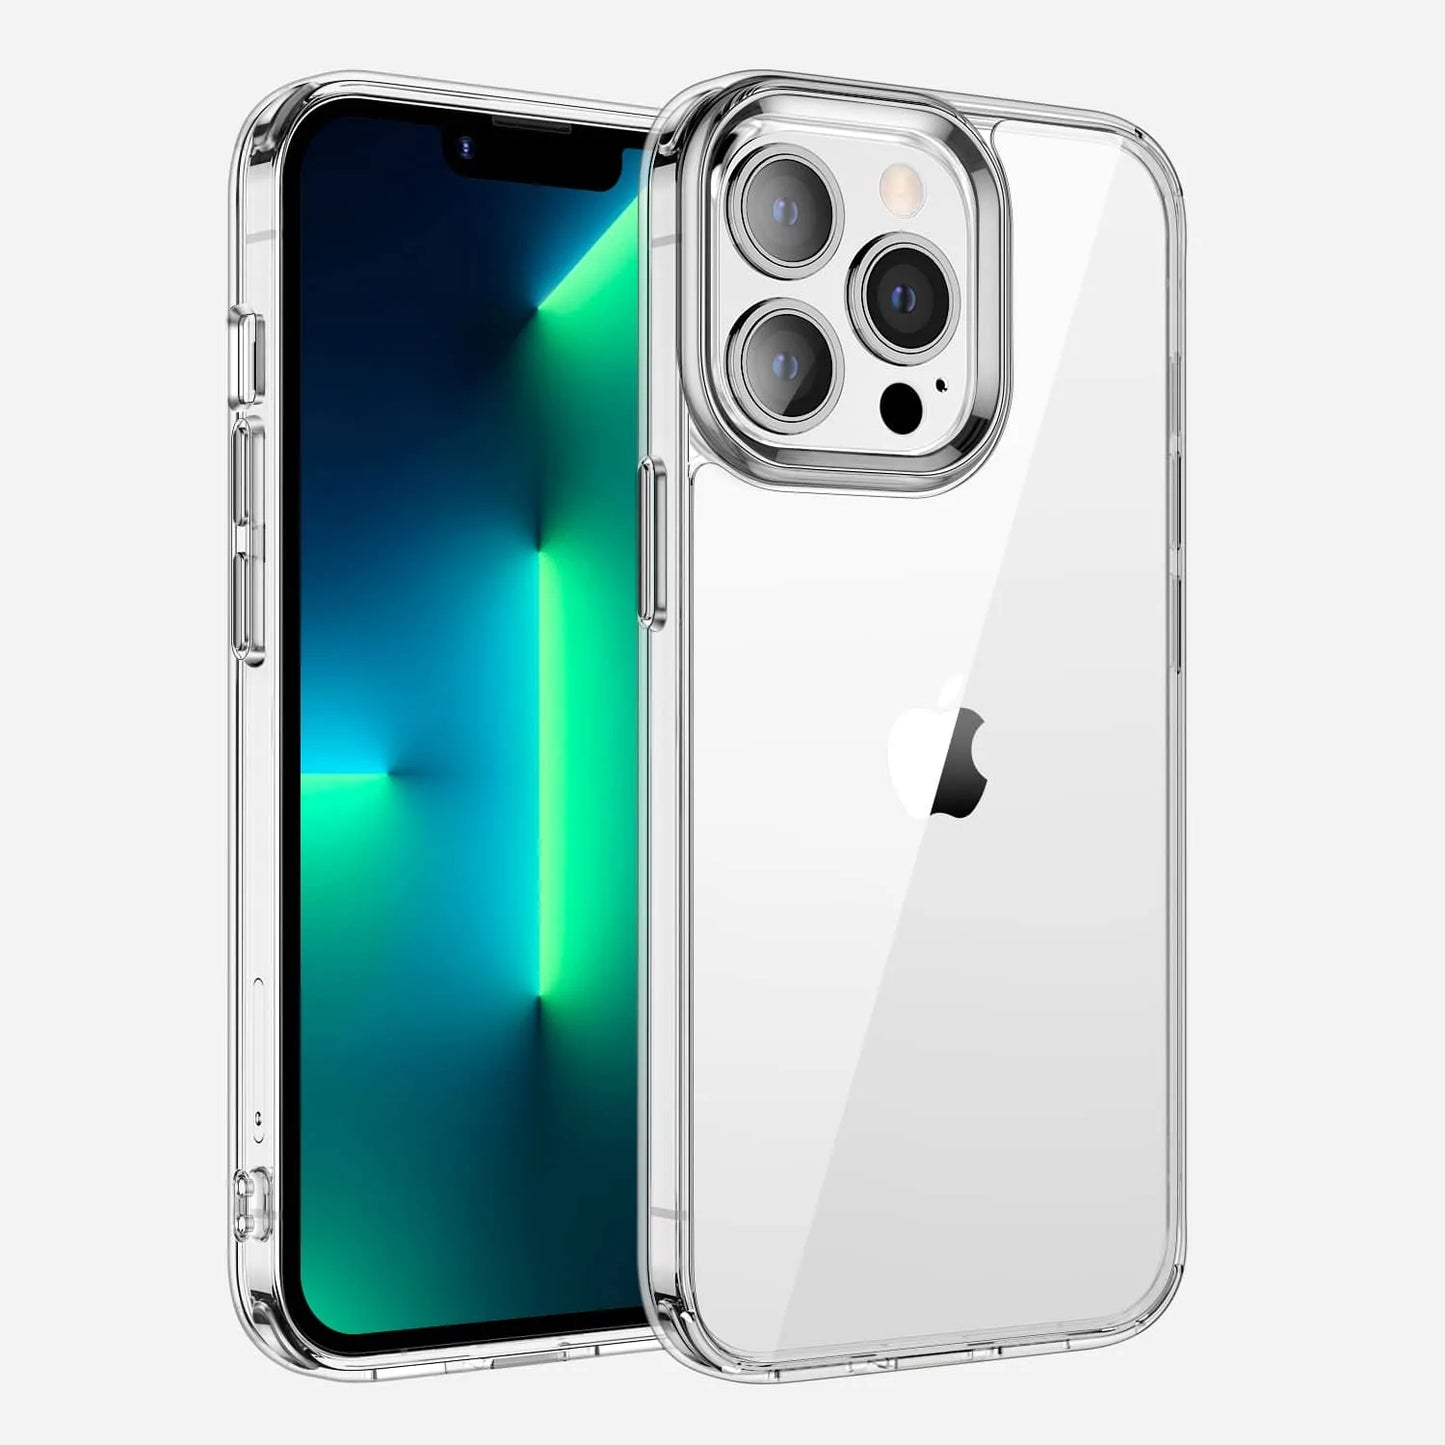 Transparent Shockproof Acrylic Hybrid Armor Hard Case for iPhone 13 PRO MAX